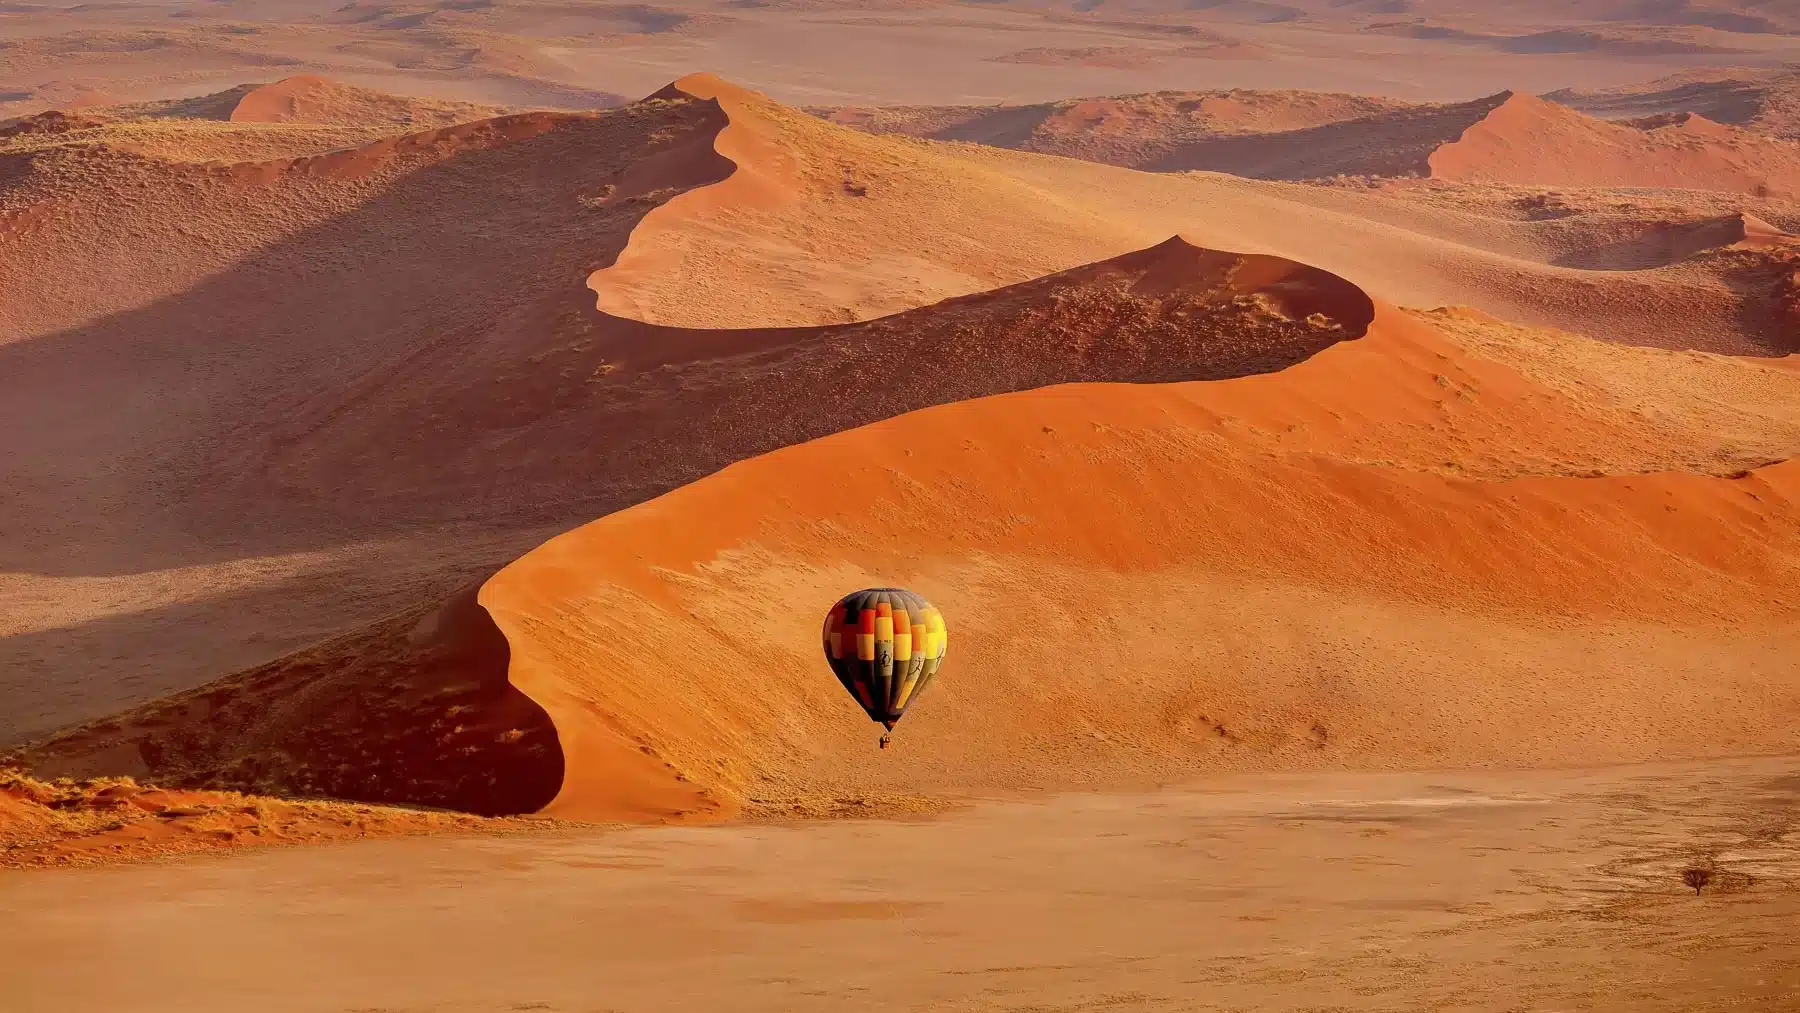 Vast desert landscape in Namibia, a striking feature of many Africa tour packages